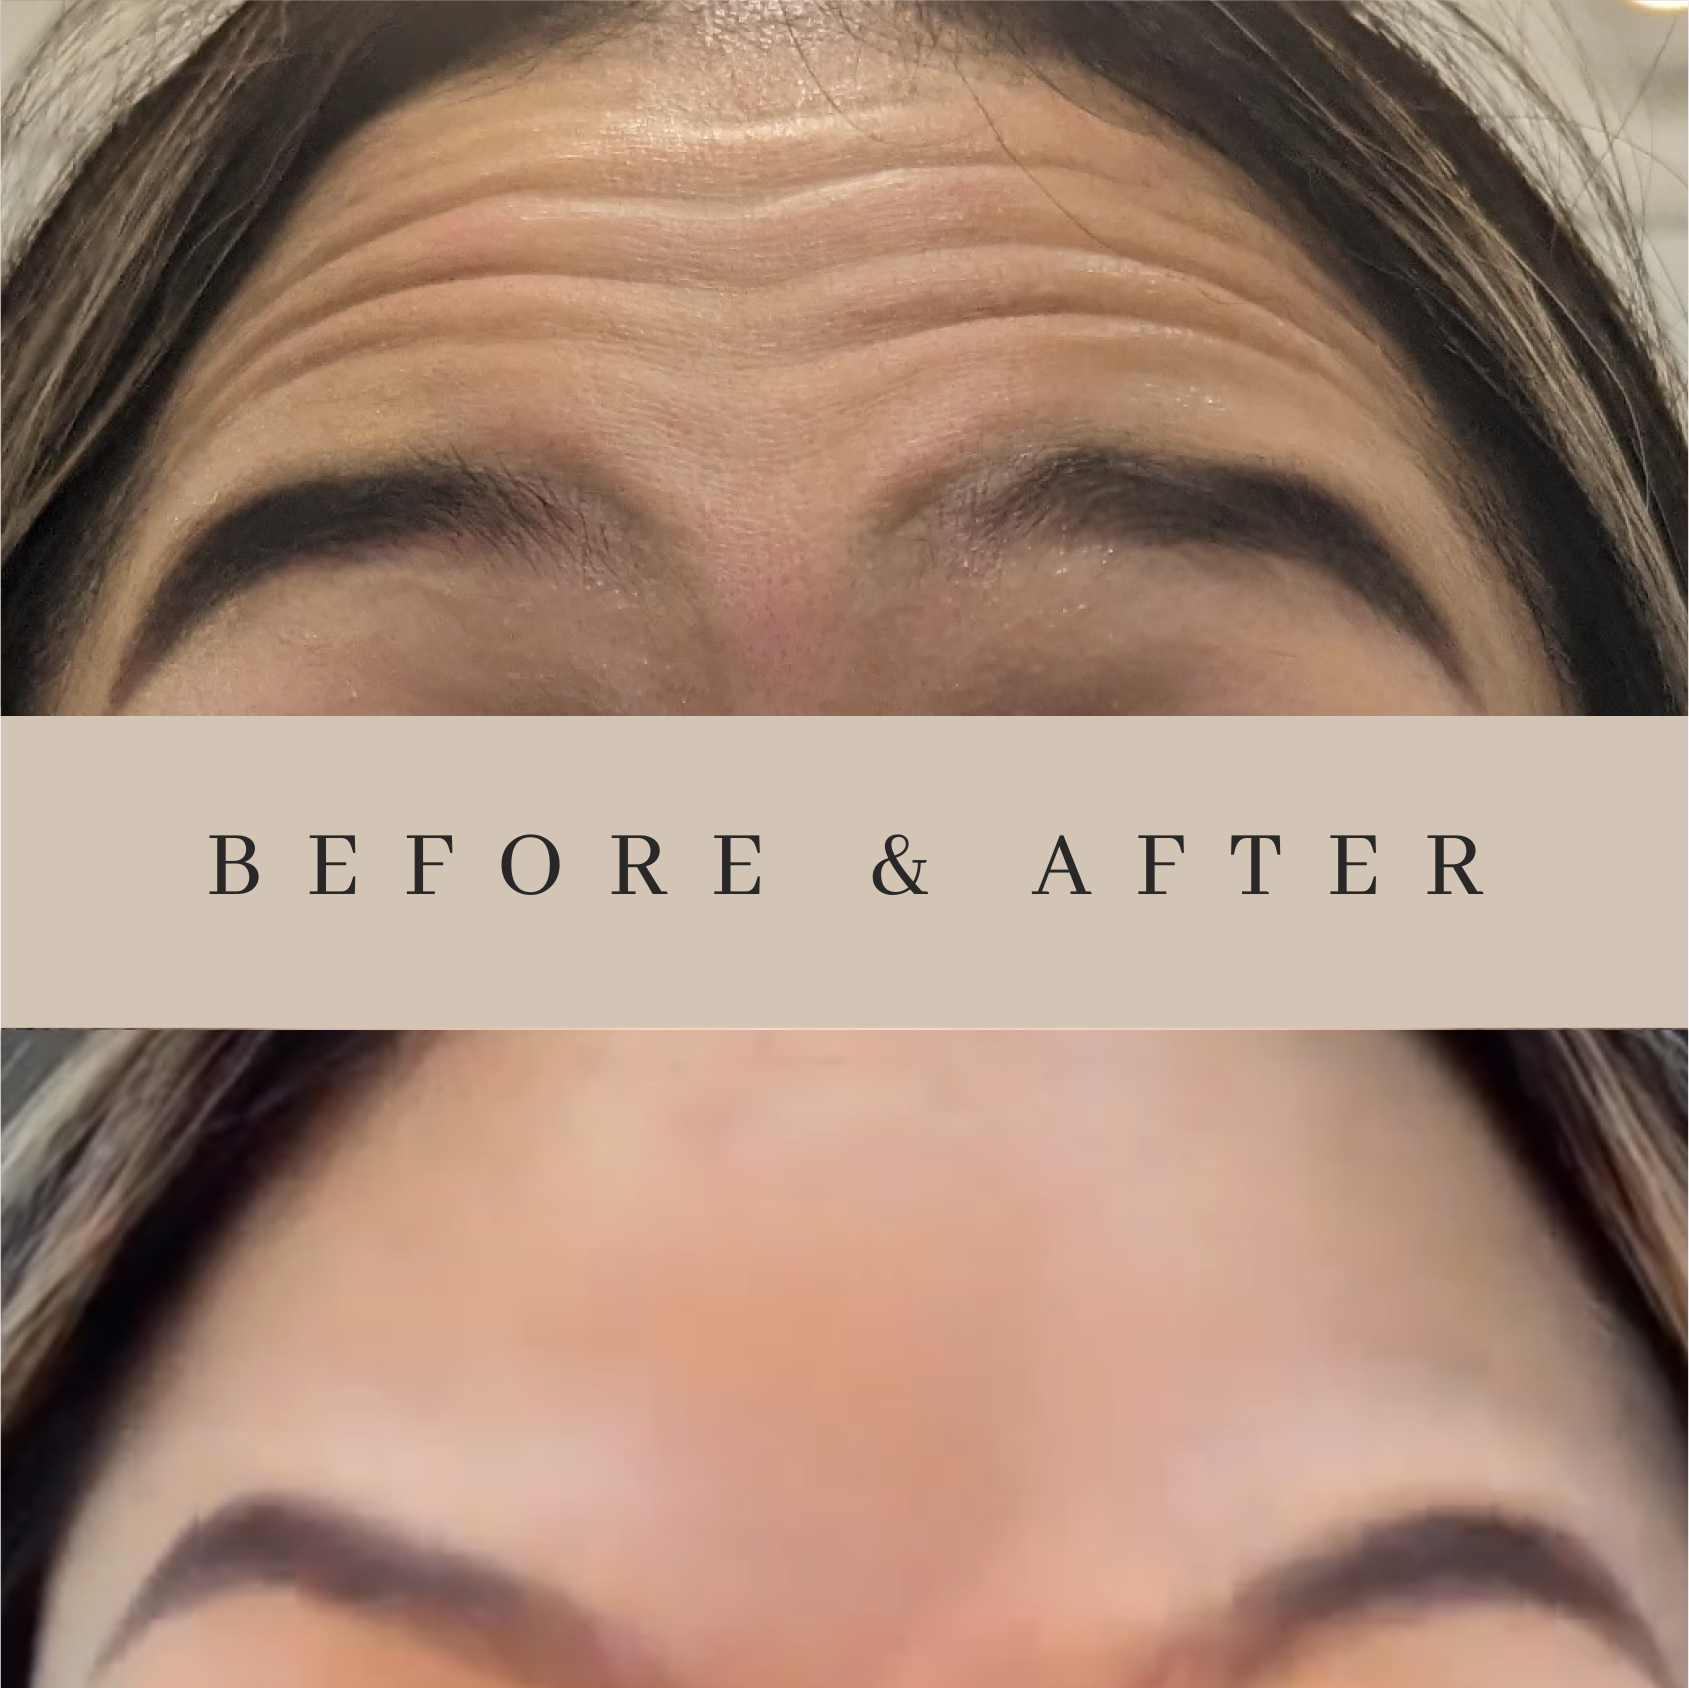 A woman 's forehead before and after botox injections.